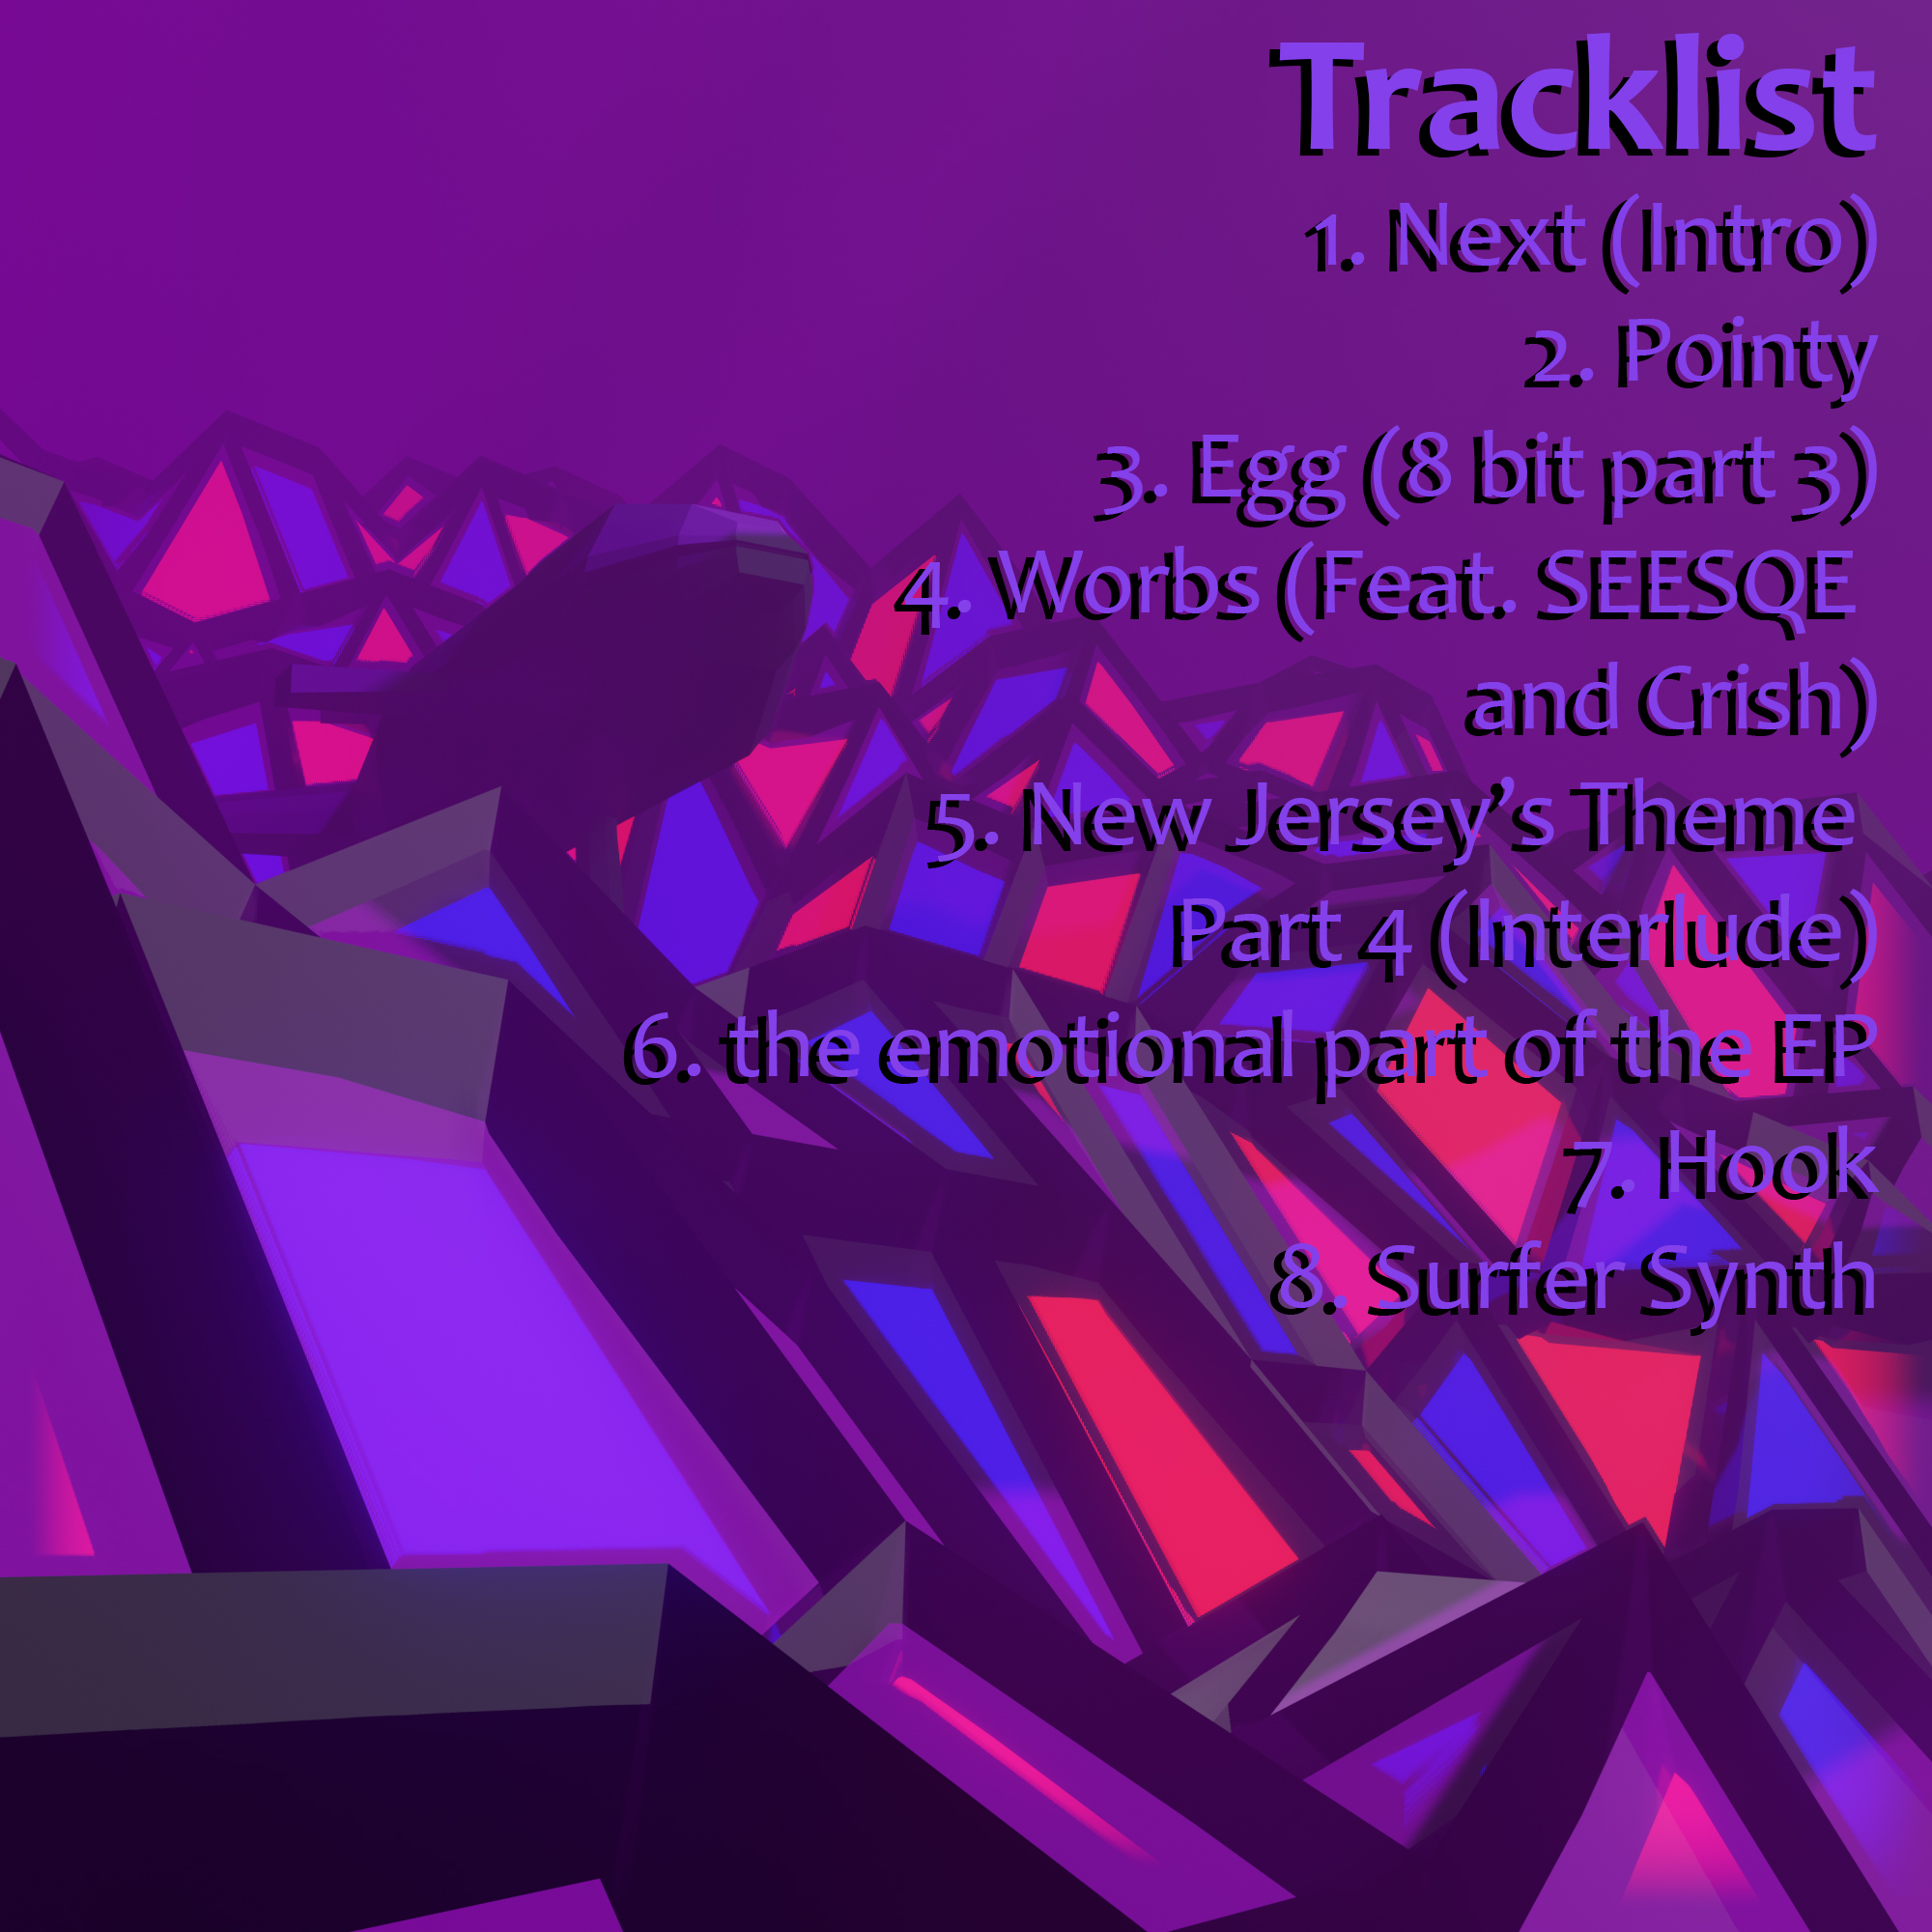 the tracklist for the NextEP